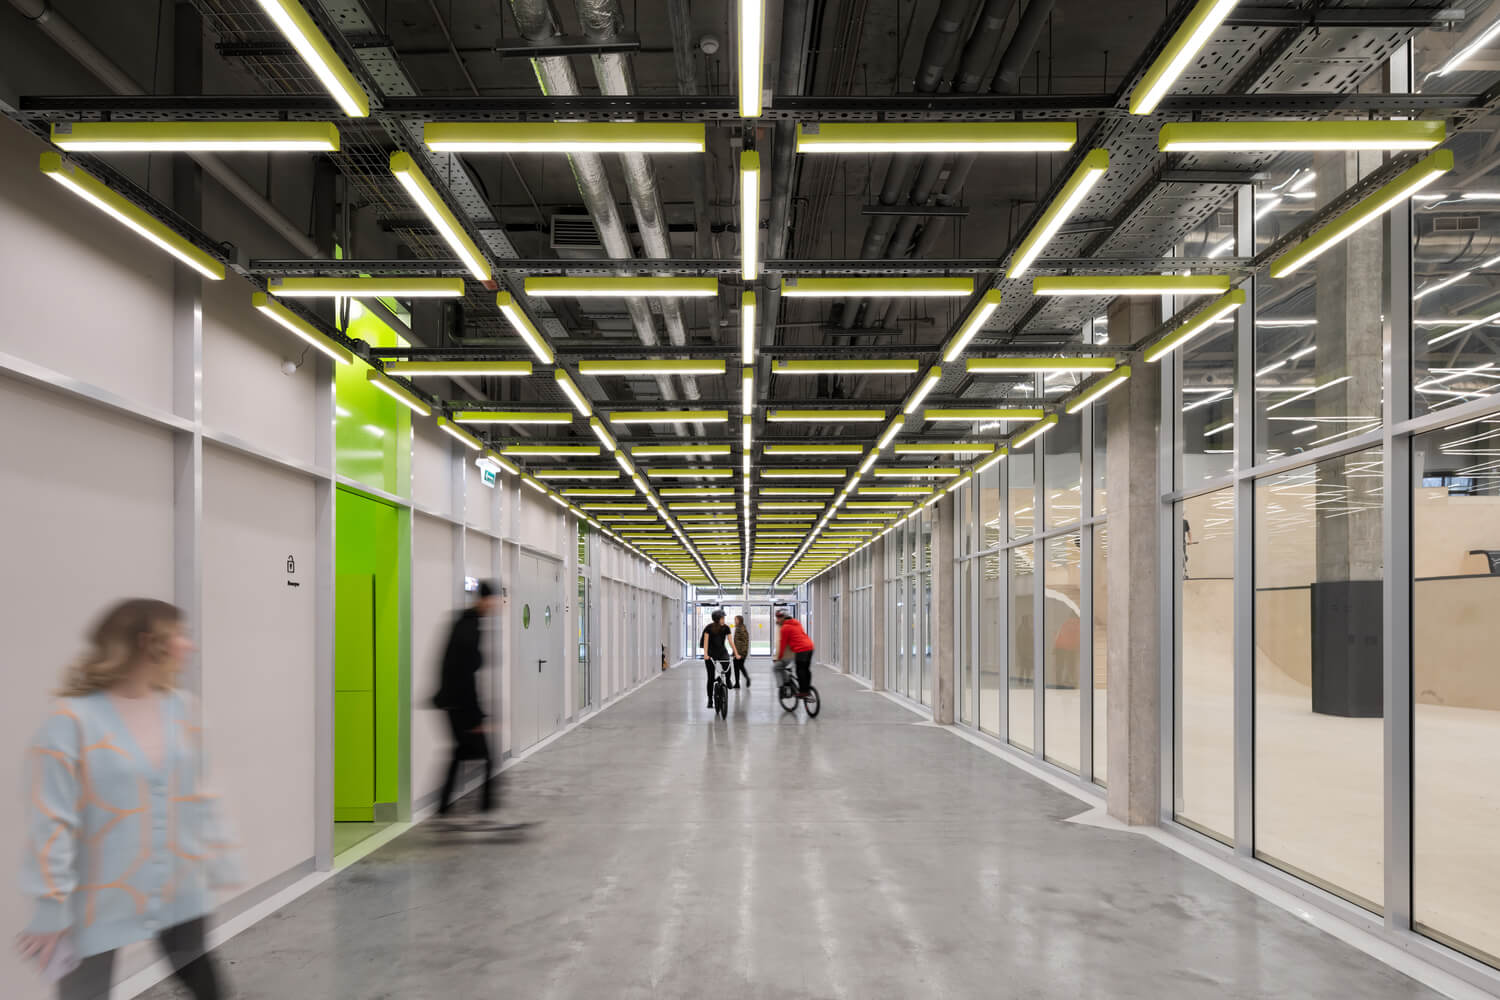 Linear LED ceiling lights with a distinctive green finish mounted to an exposed grid in a warehouse converted to a skate park